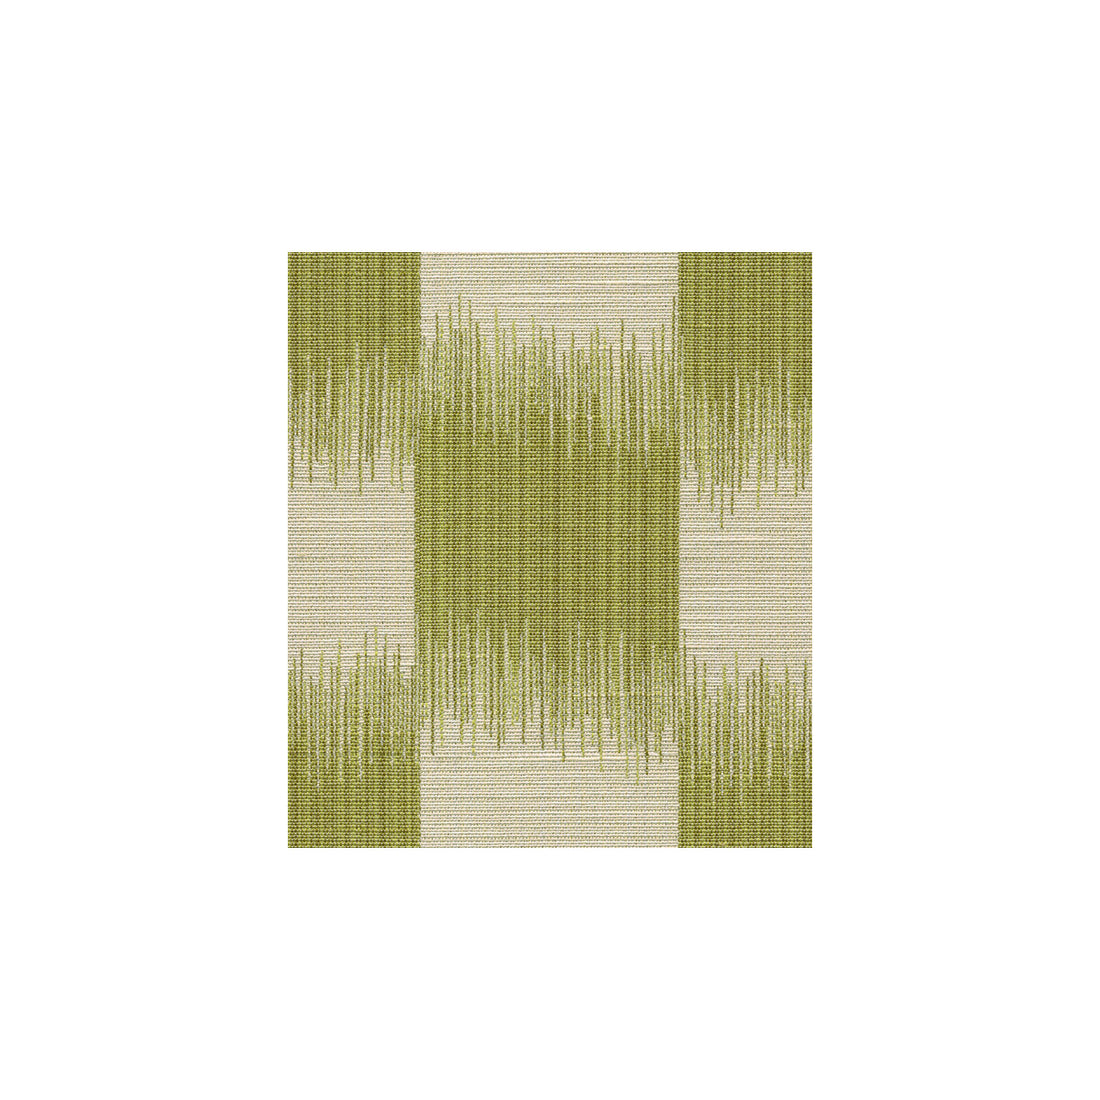 Baladi fabric in dill color - pattern 32130.3.0 - by Kravet Design in the The Echo Home collection